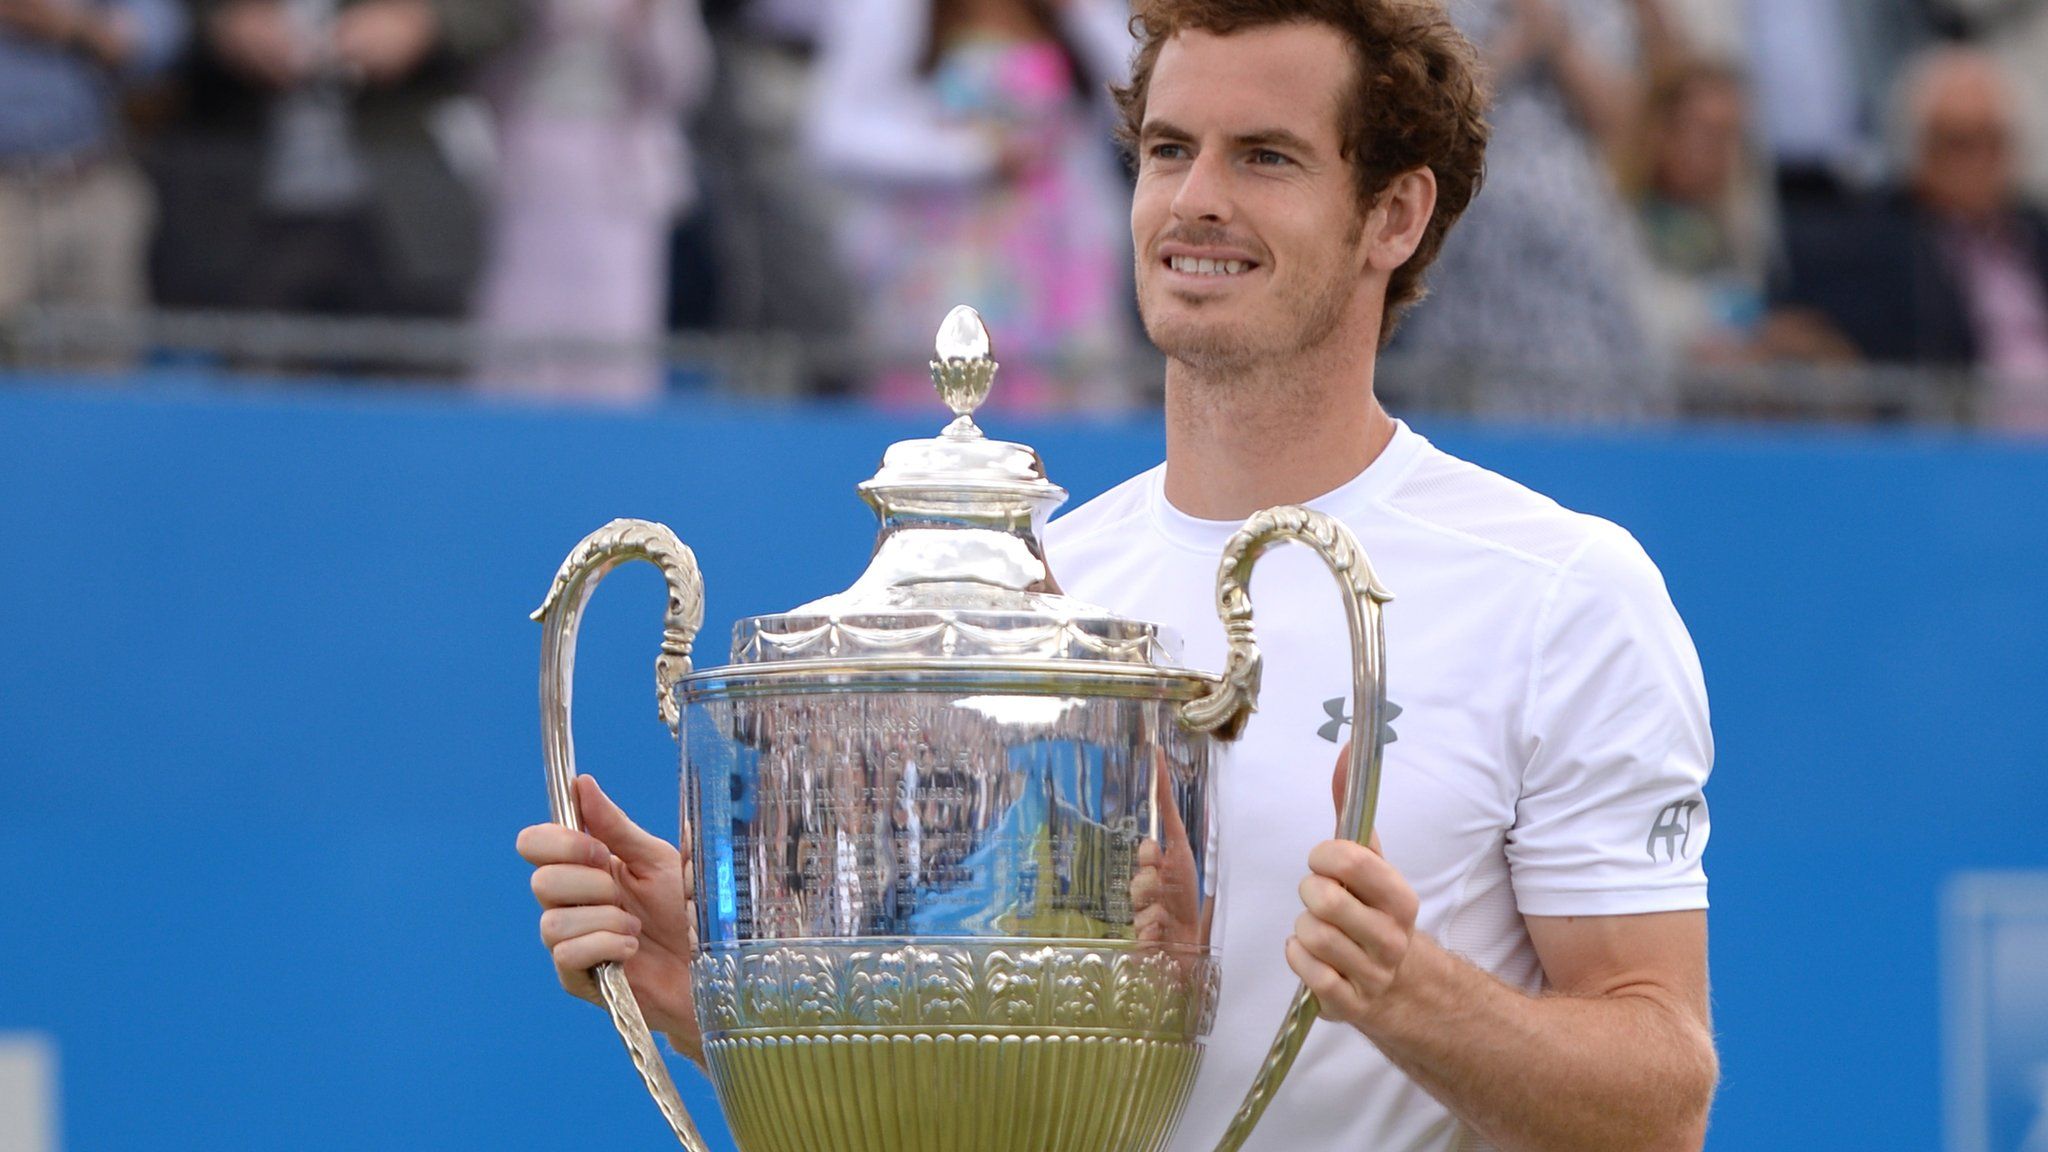 Andy Murray lifts the trophy